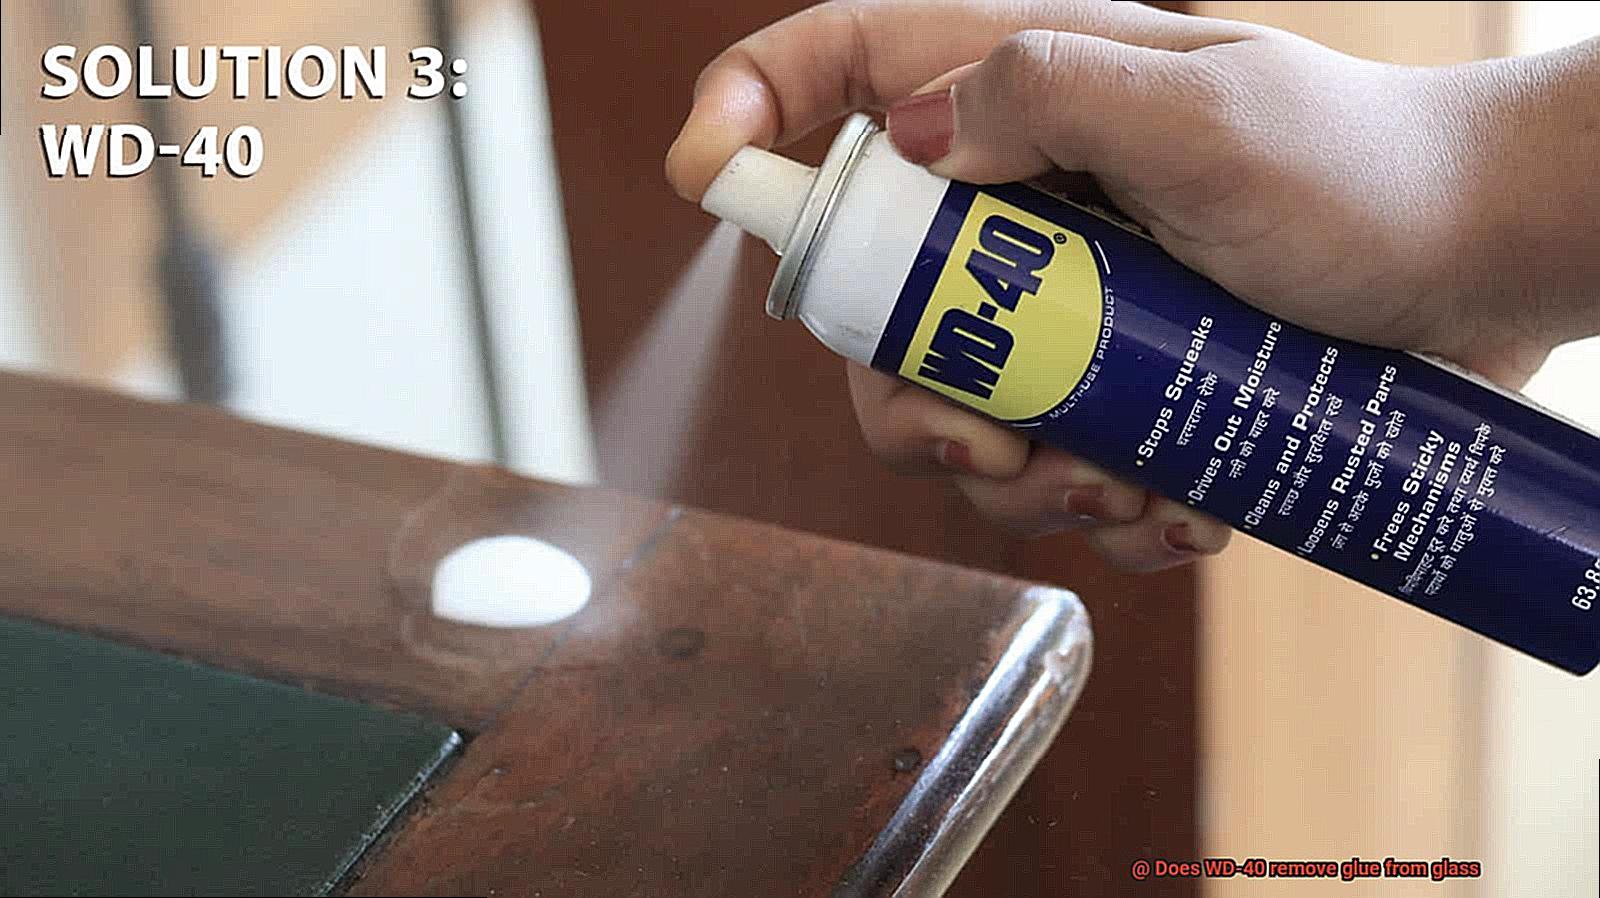 Does WD-40 remove glue from glass-2